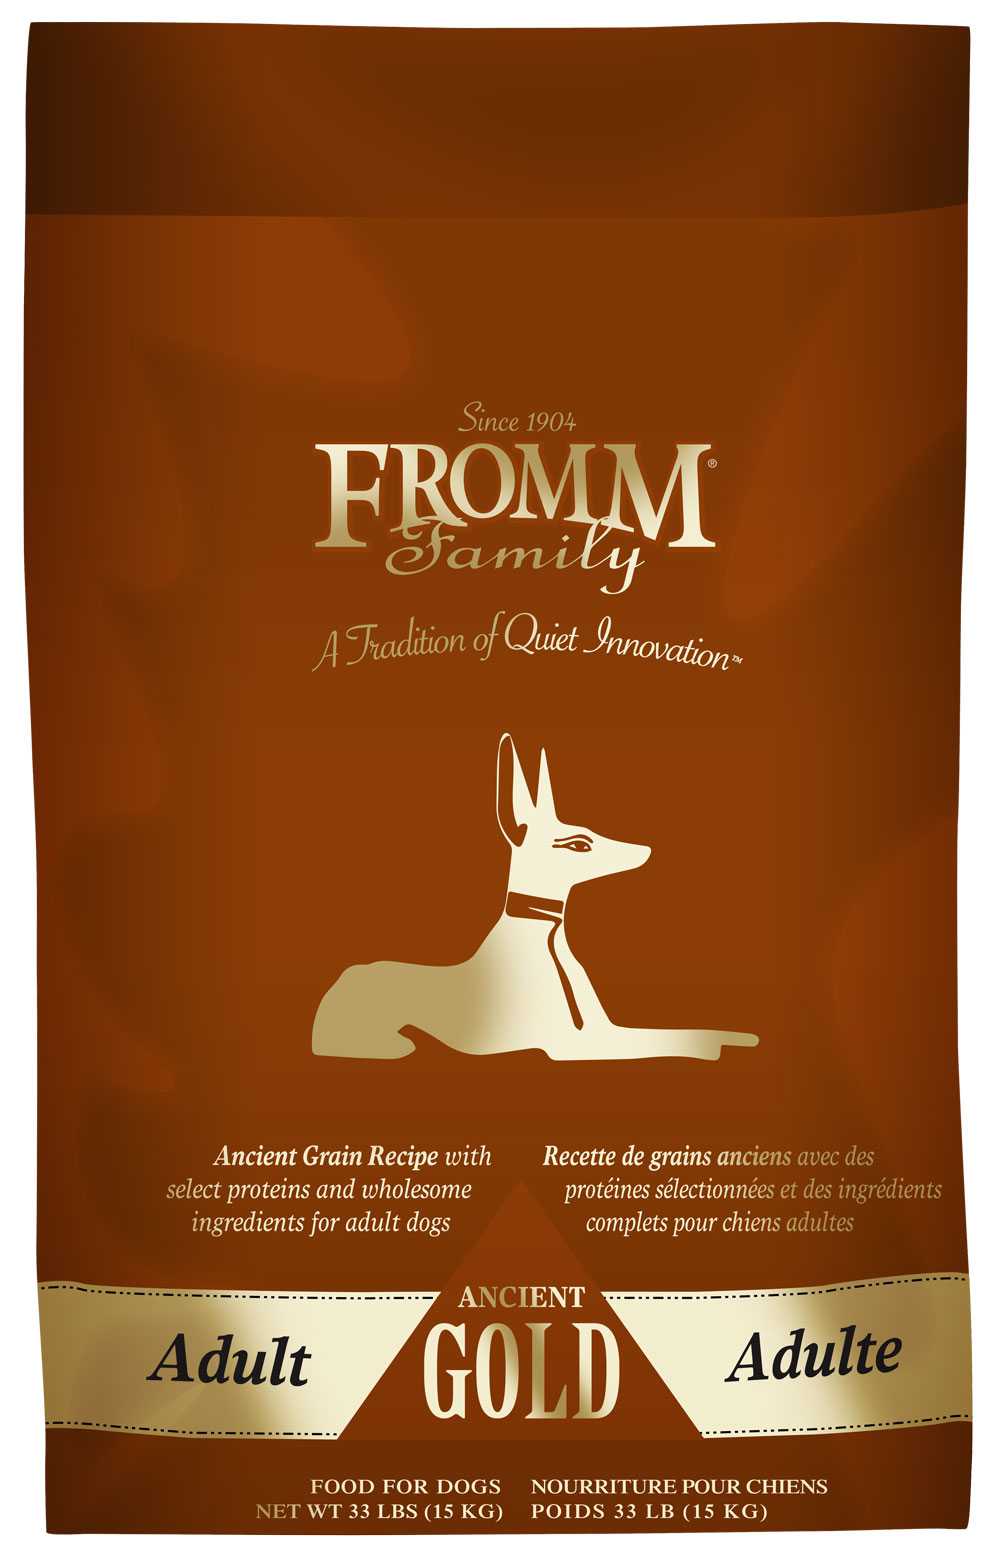 Fromm Family Adult Ancient Gold for Dogs, 33 lbs